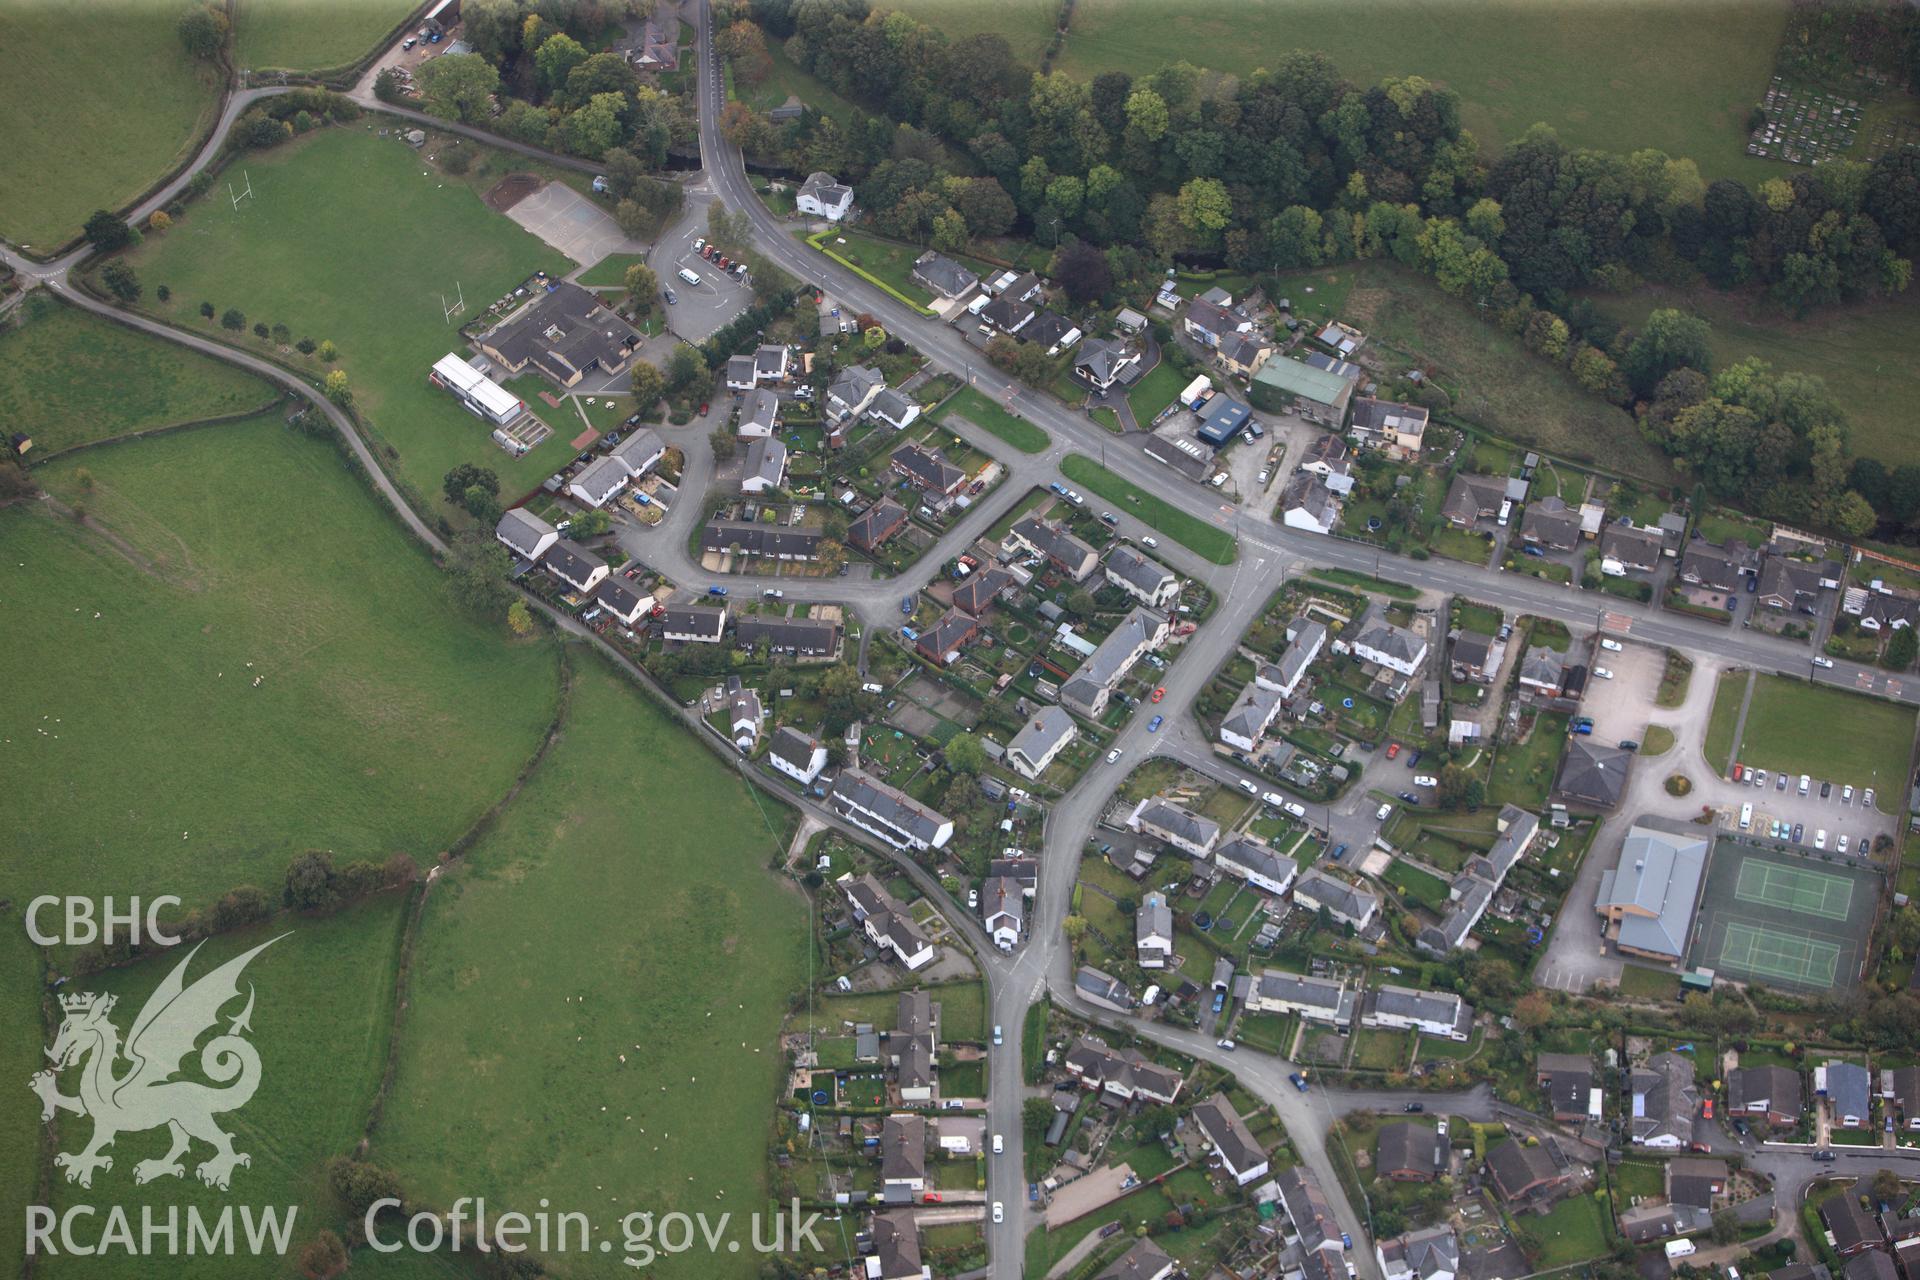 RCAHMW colour oblique photograph of Glyn Ceriog Village. Taken by Toby Driver on 04/10/2011.